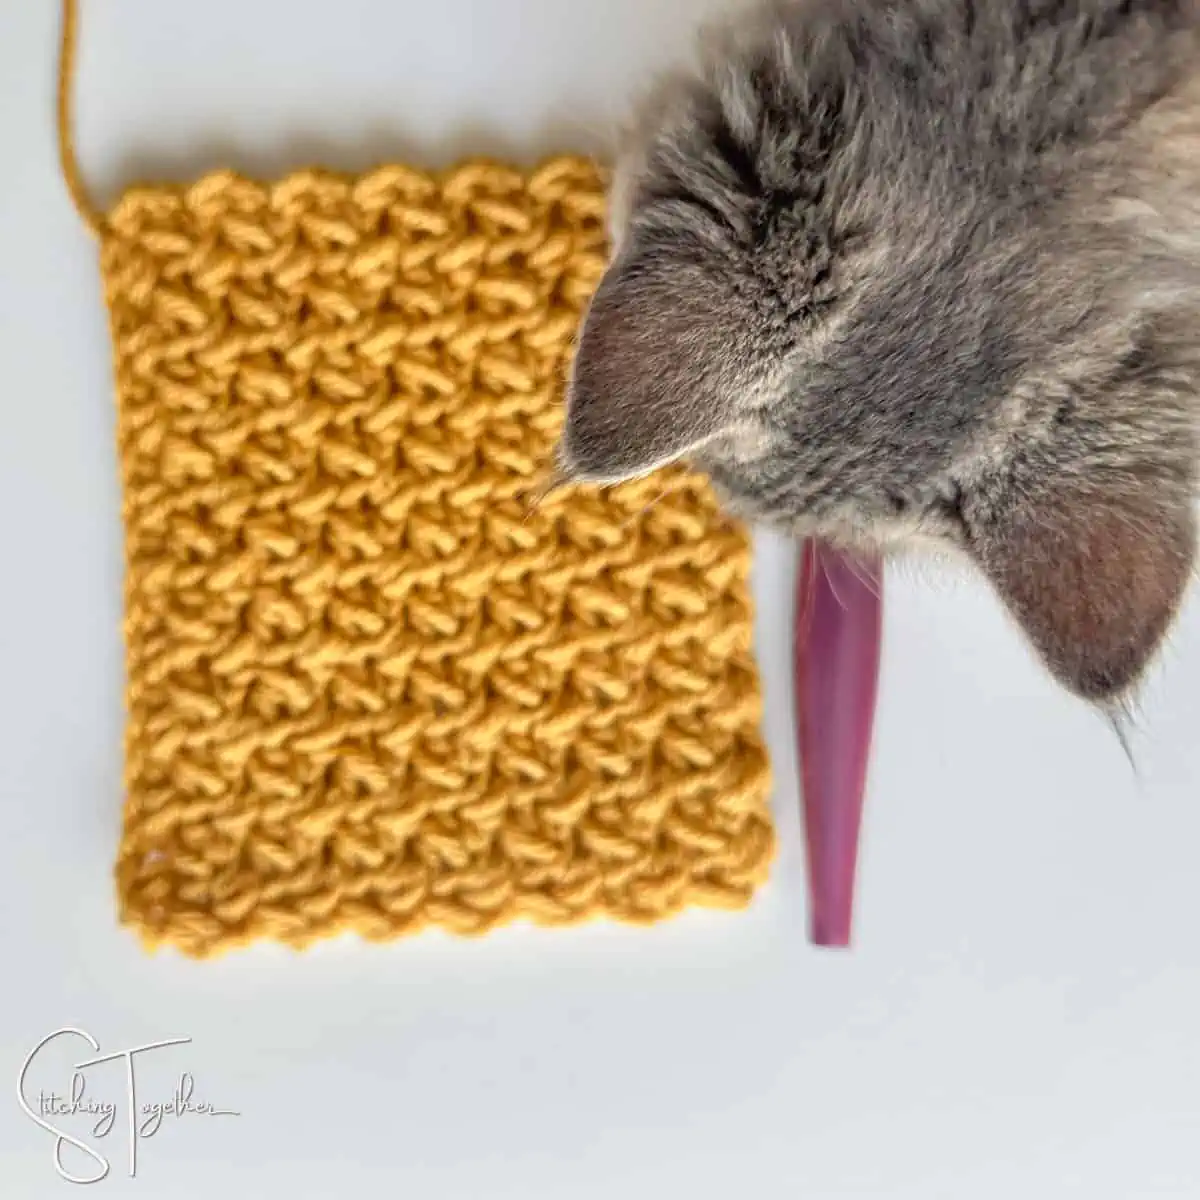 top of a kitten's head looking down at a swatch of crochet